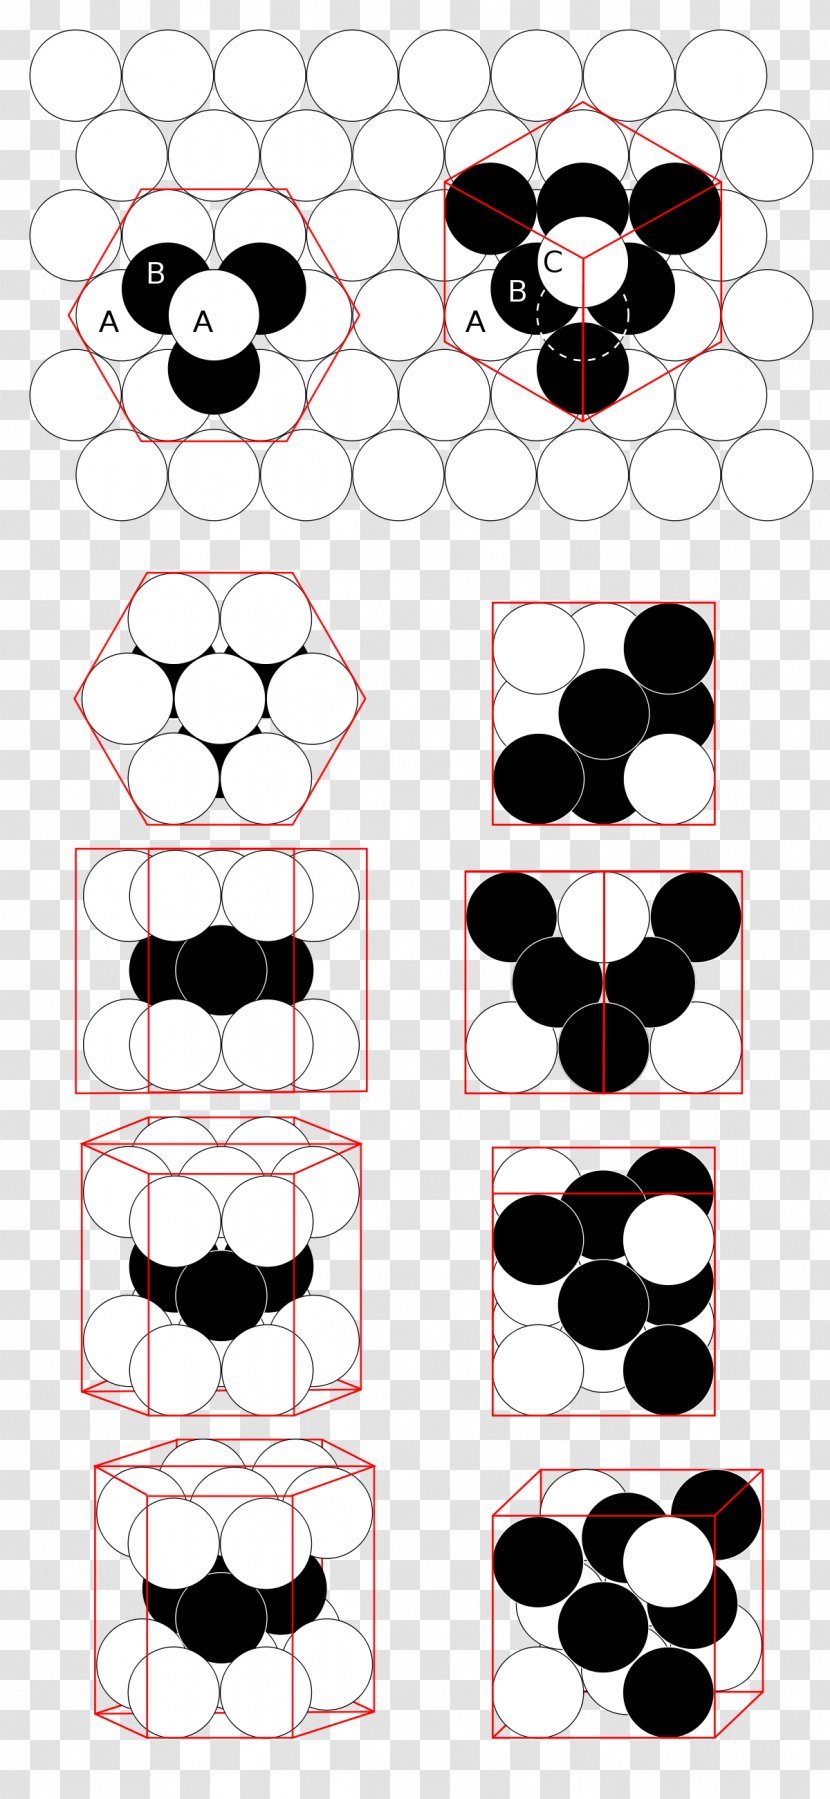 Close-packing Of Equal Spheres Sphere Packing Problems Atomic Factor - Planes Transparent PNG